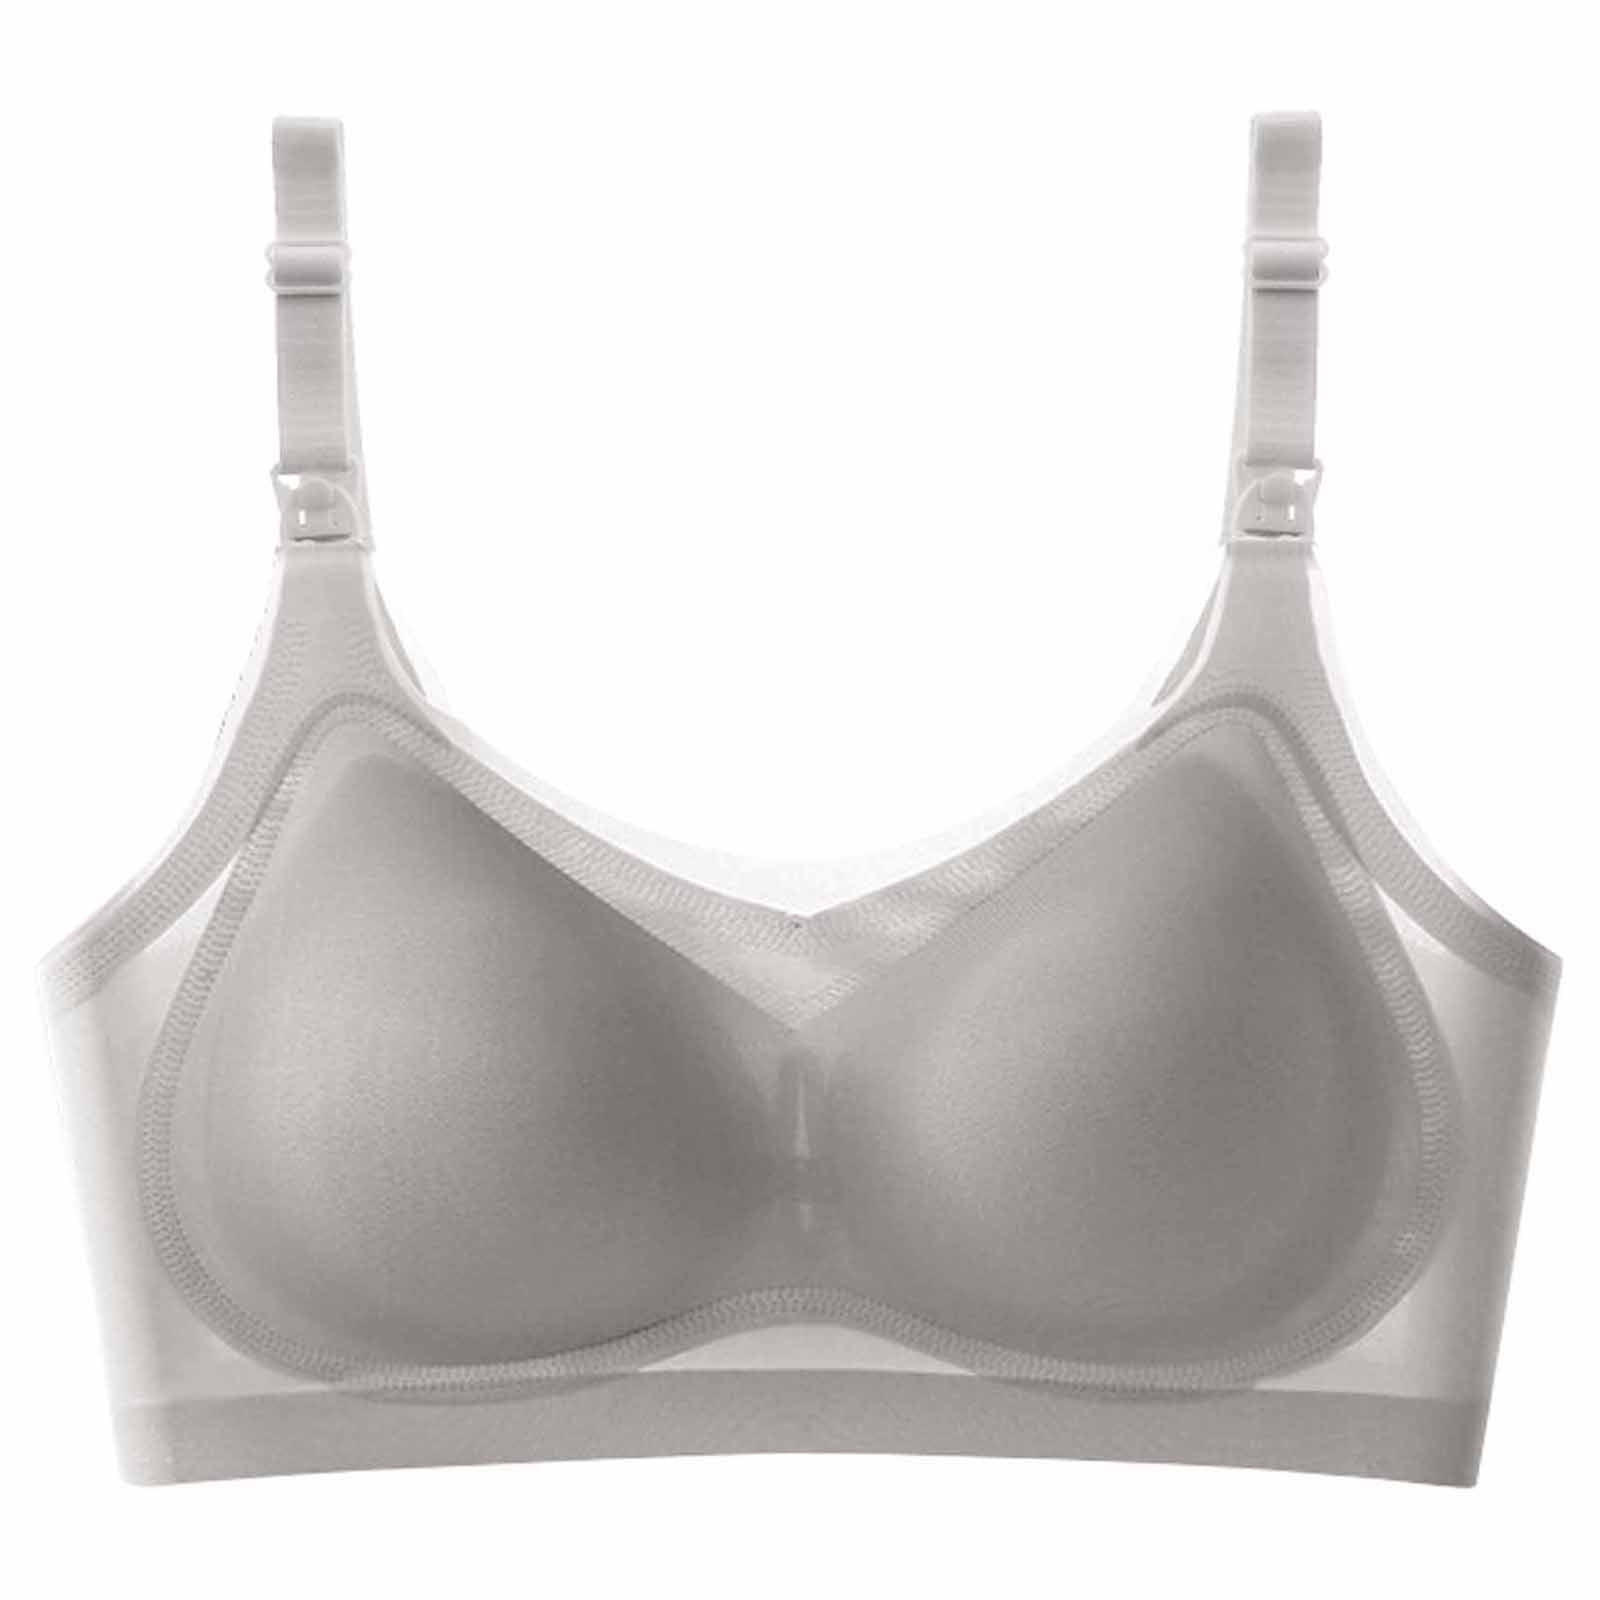 Buy Outry Reusable Stress Adhesive Bra, Backless Silicone